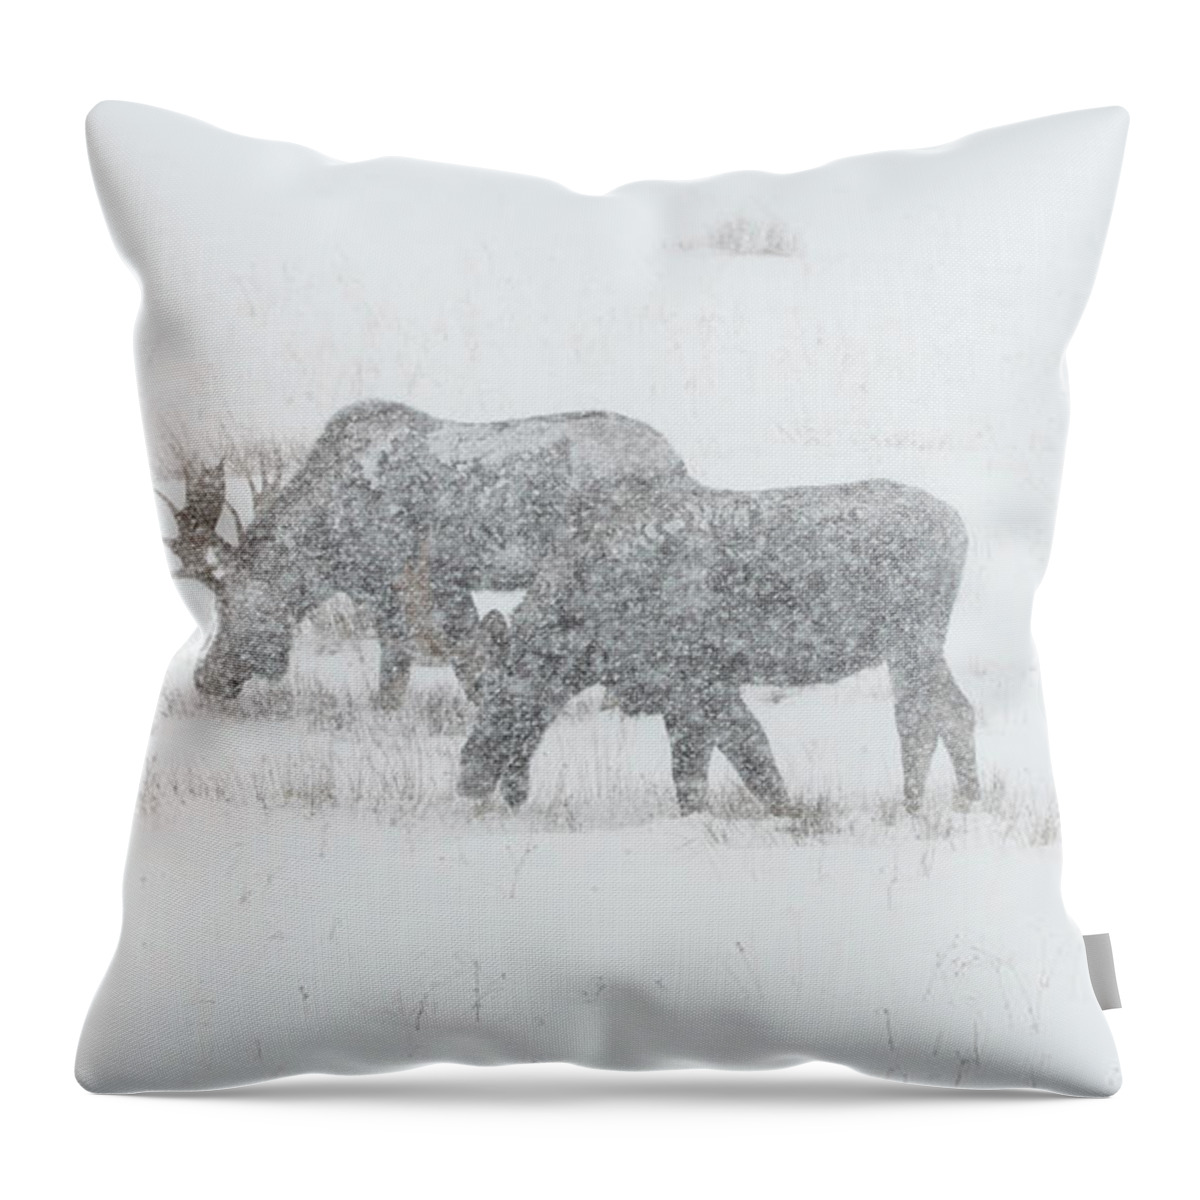 Moose Throw Pillow featuring the photograph Moose In A Snowstorm by Patrick Nowotny